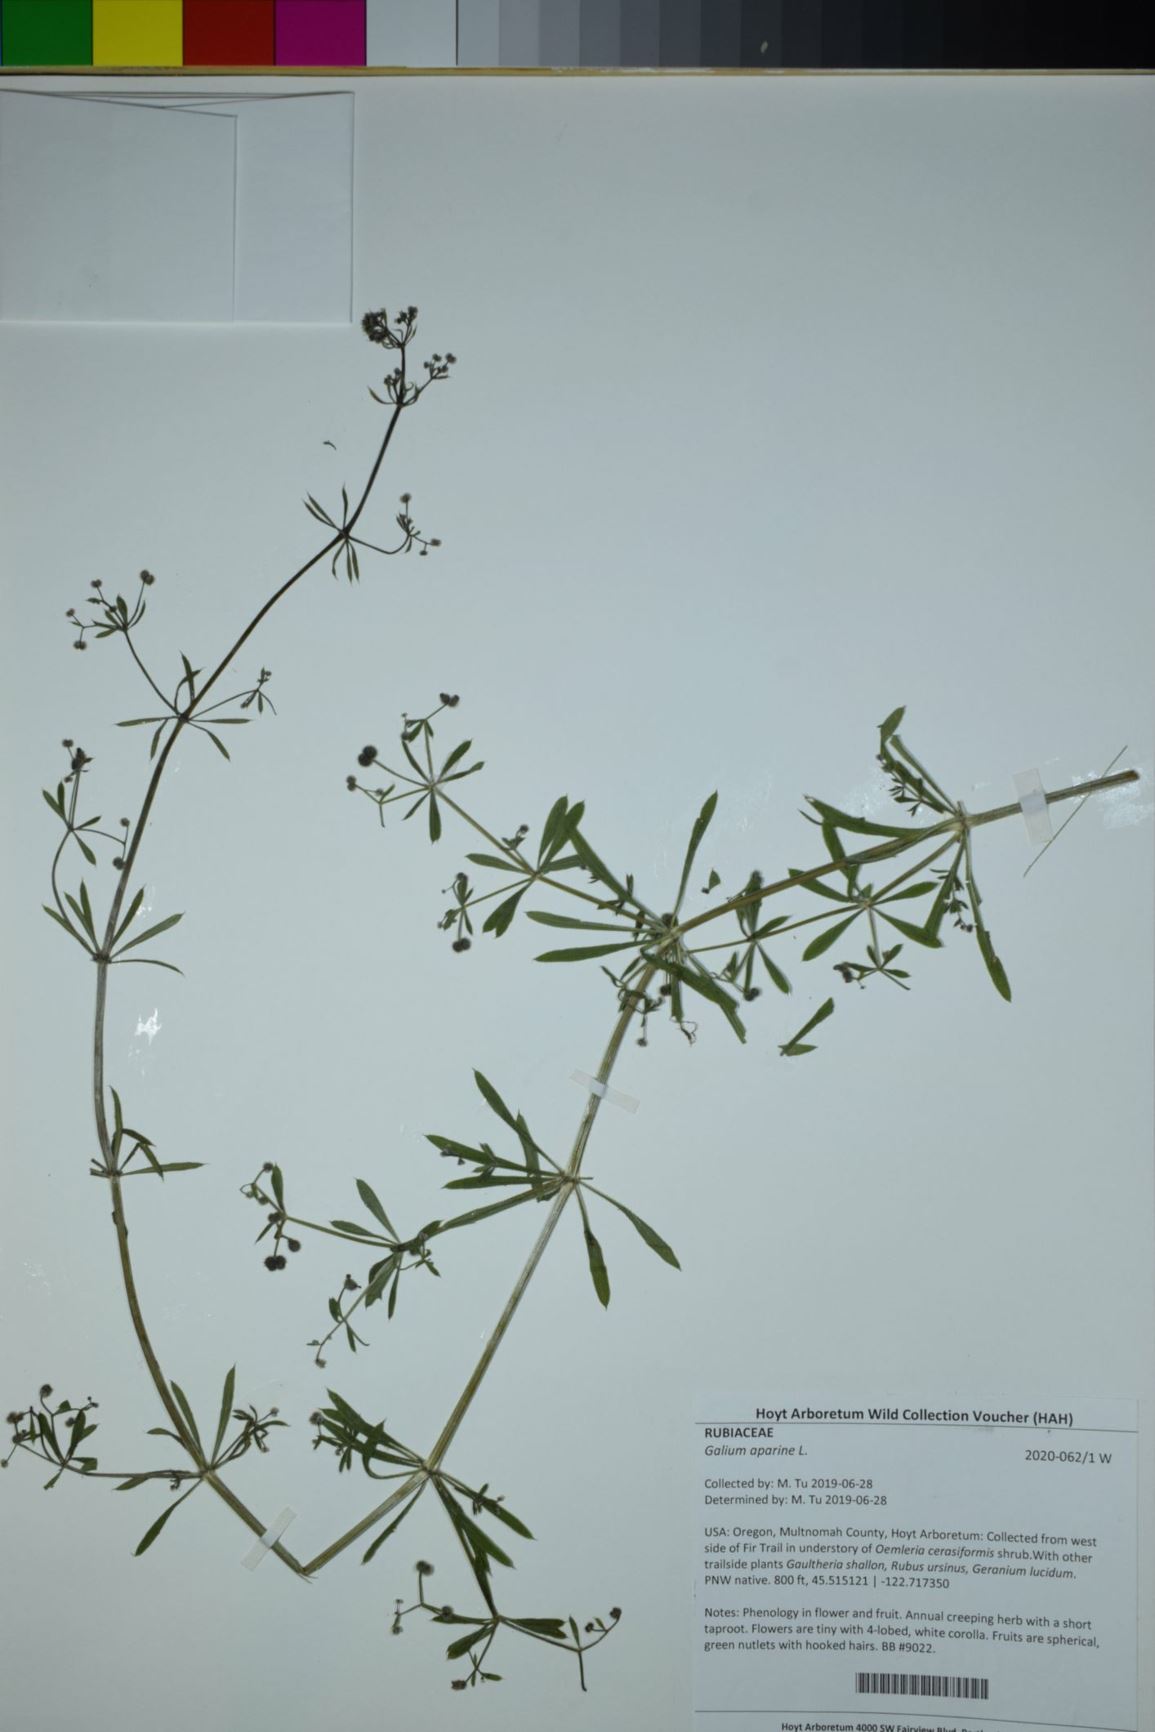 Galium aparine - bedstraw, cleavers, cleaverwort, scarthgrass, white hedge, catchweed bedstraw, goose grass, sticky-willy, stickywilly